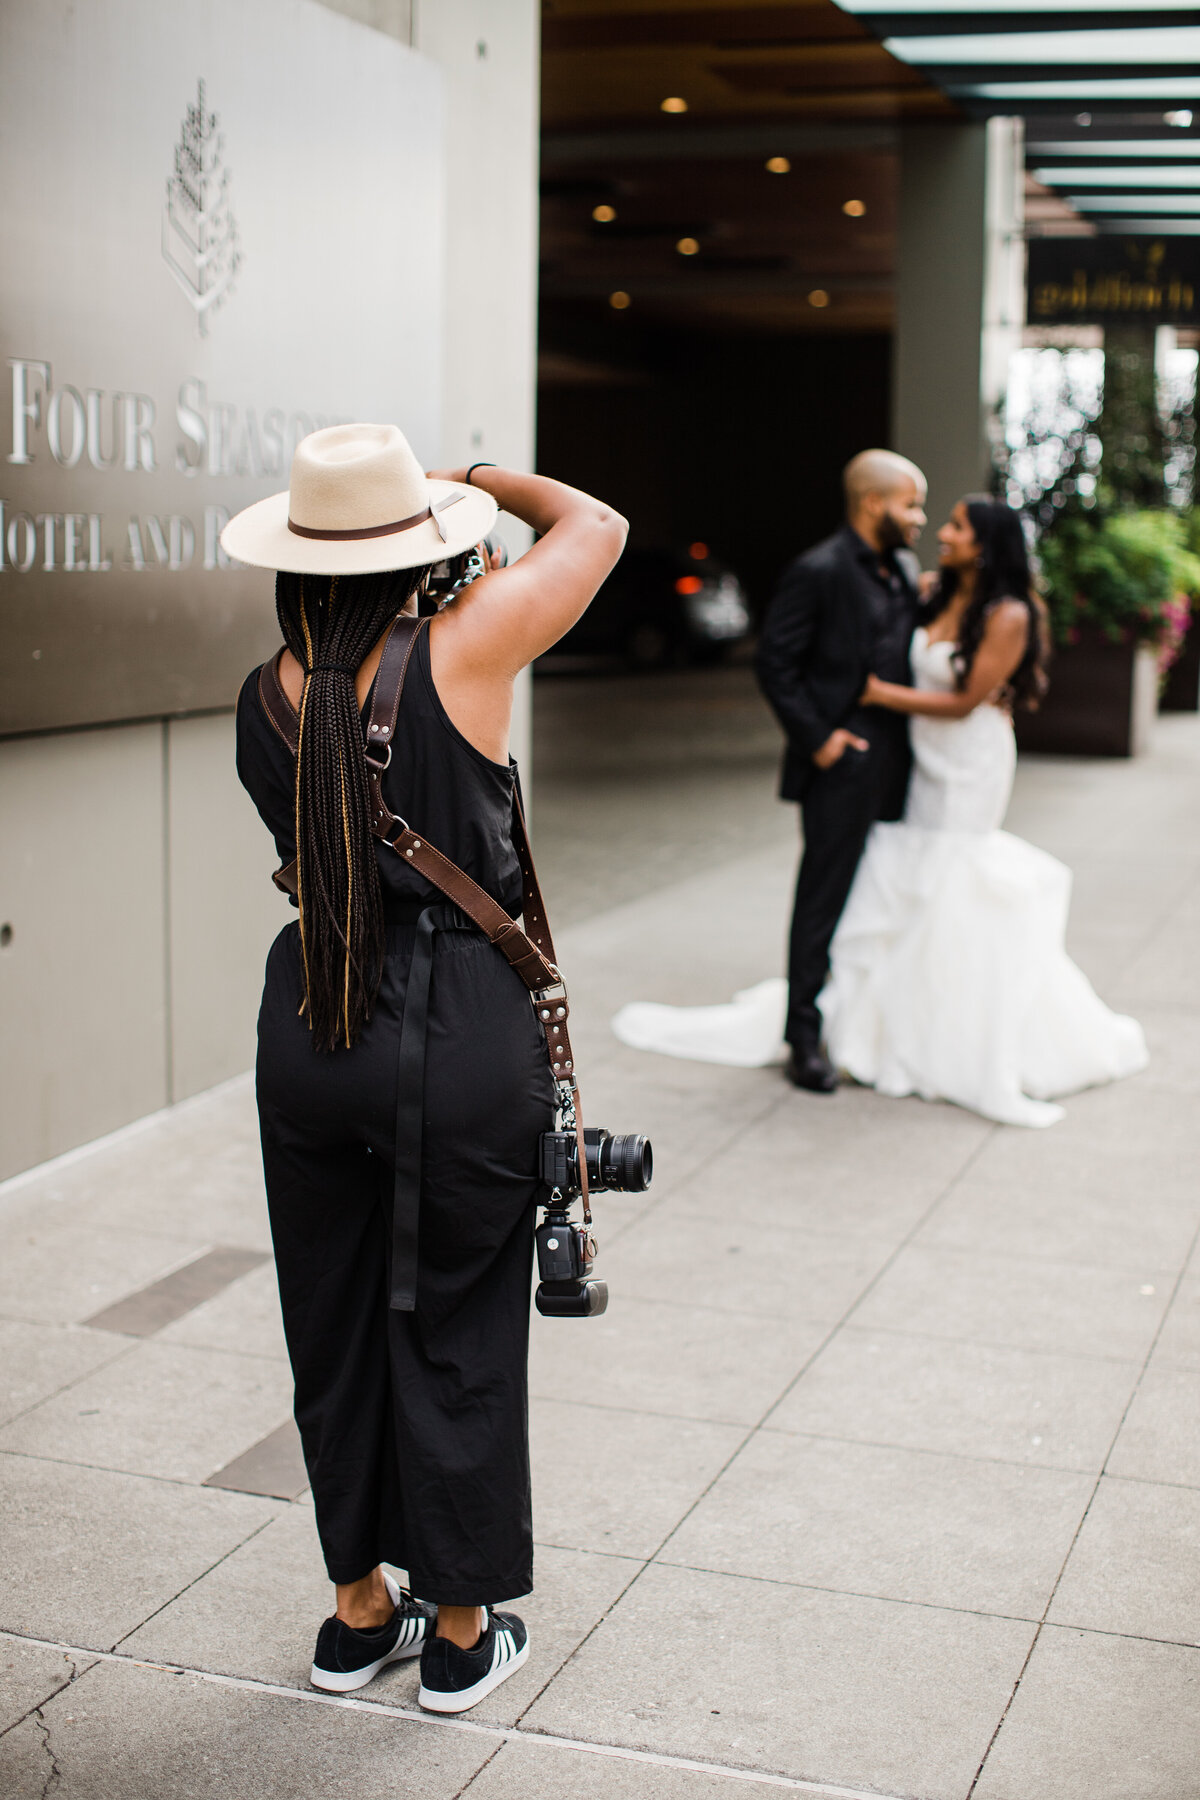 Four Seasons Seattle Wedding | Captured by Candace Photography